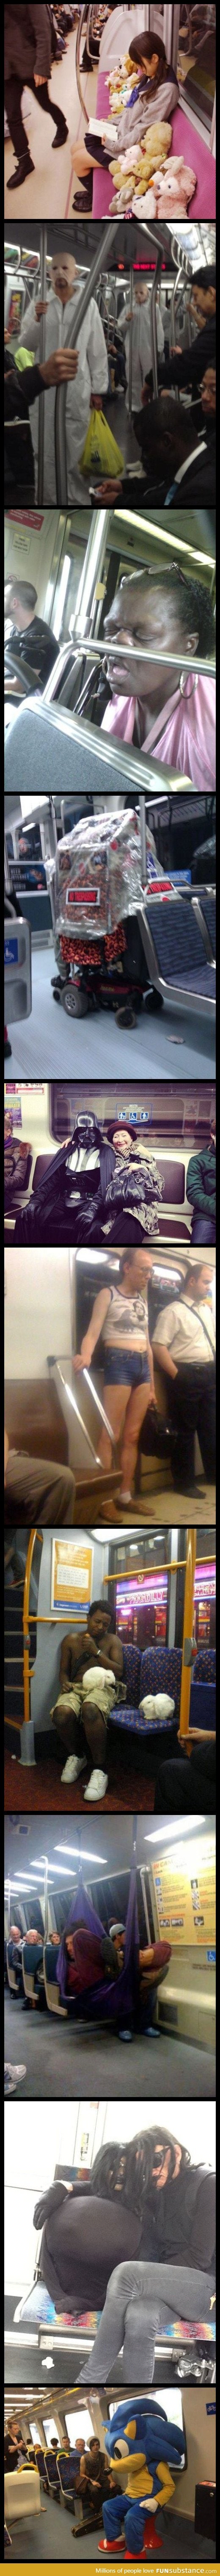 You never know what you might see on the subway...